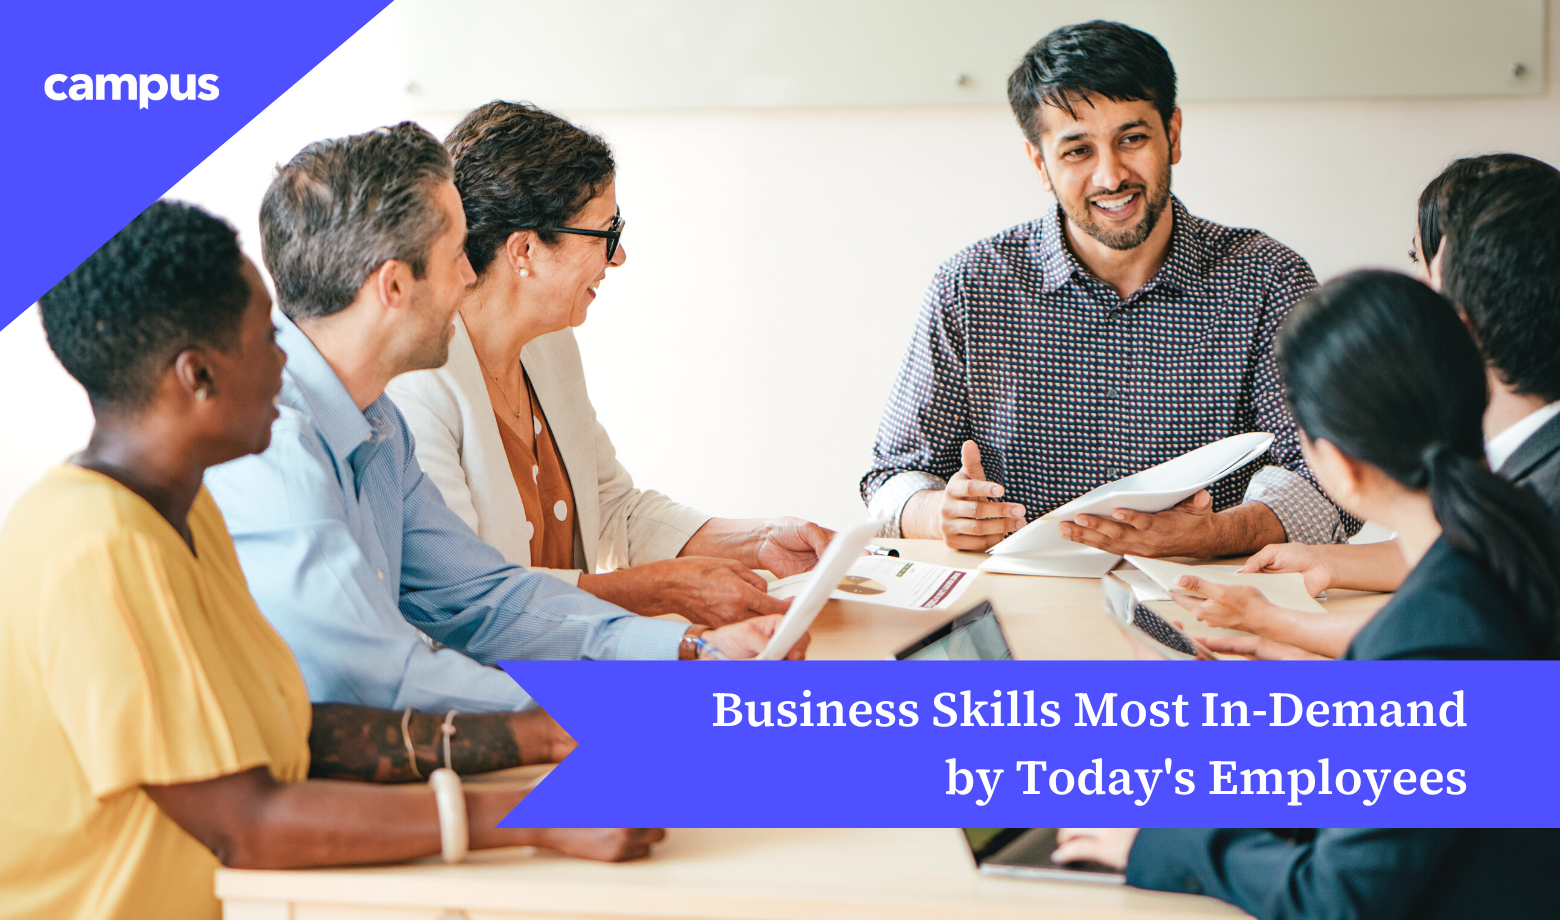 Top Business Administration Skills Most In-Demand by Today’s Employers